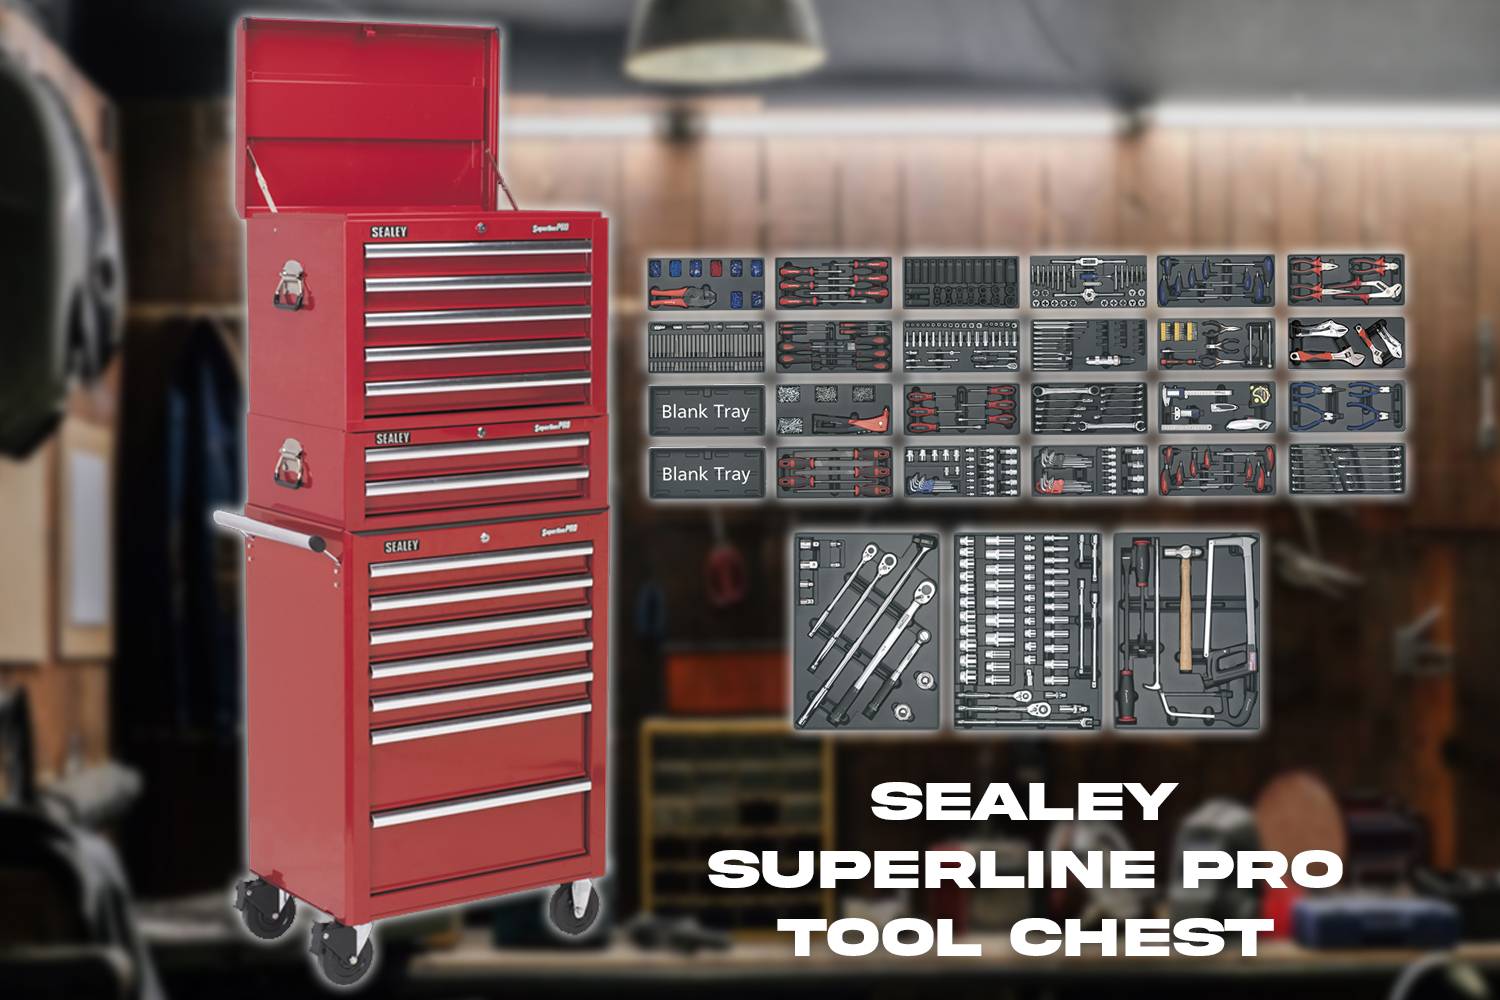 Win This Sealey Superline Pro Tool Chest